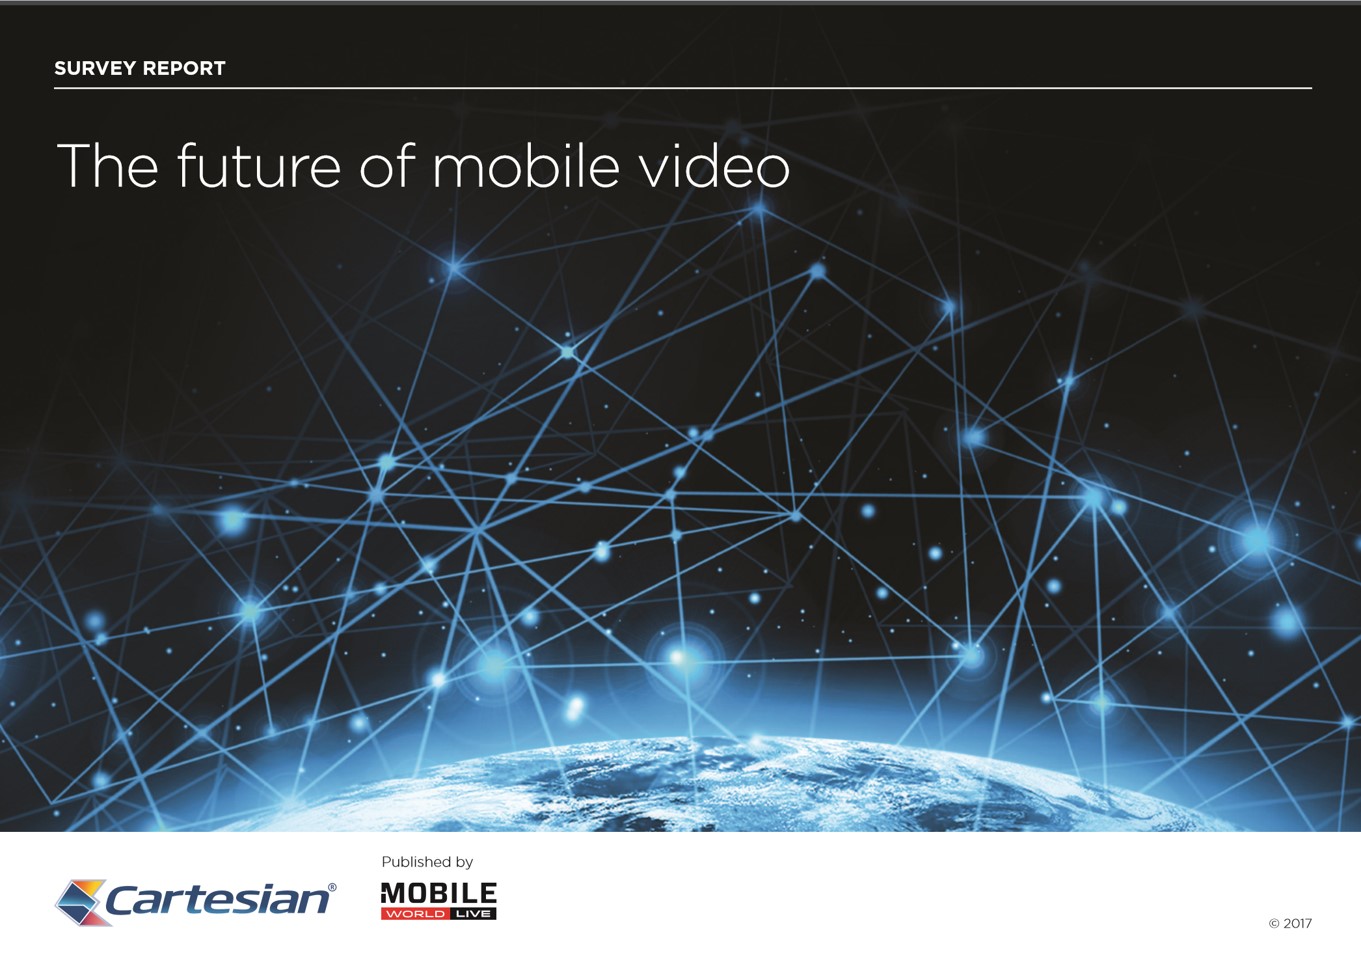 The Future of Mobile Video